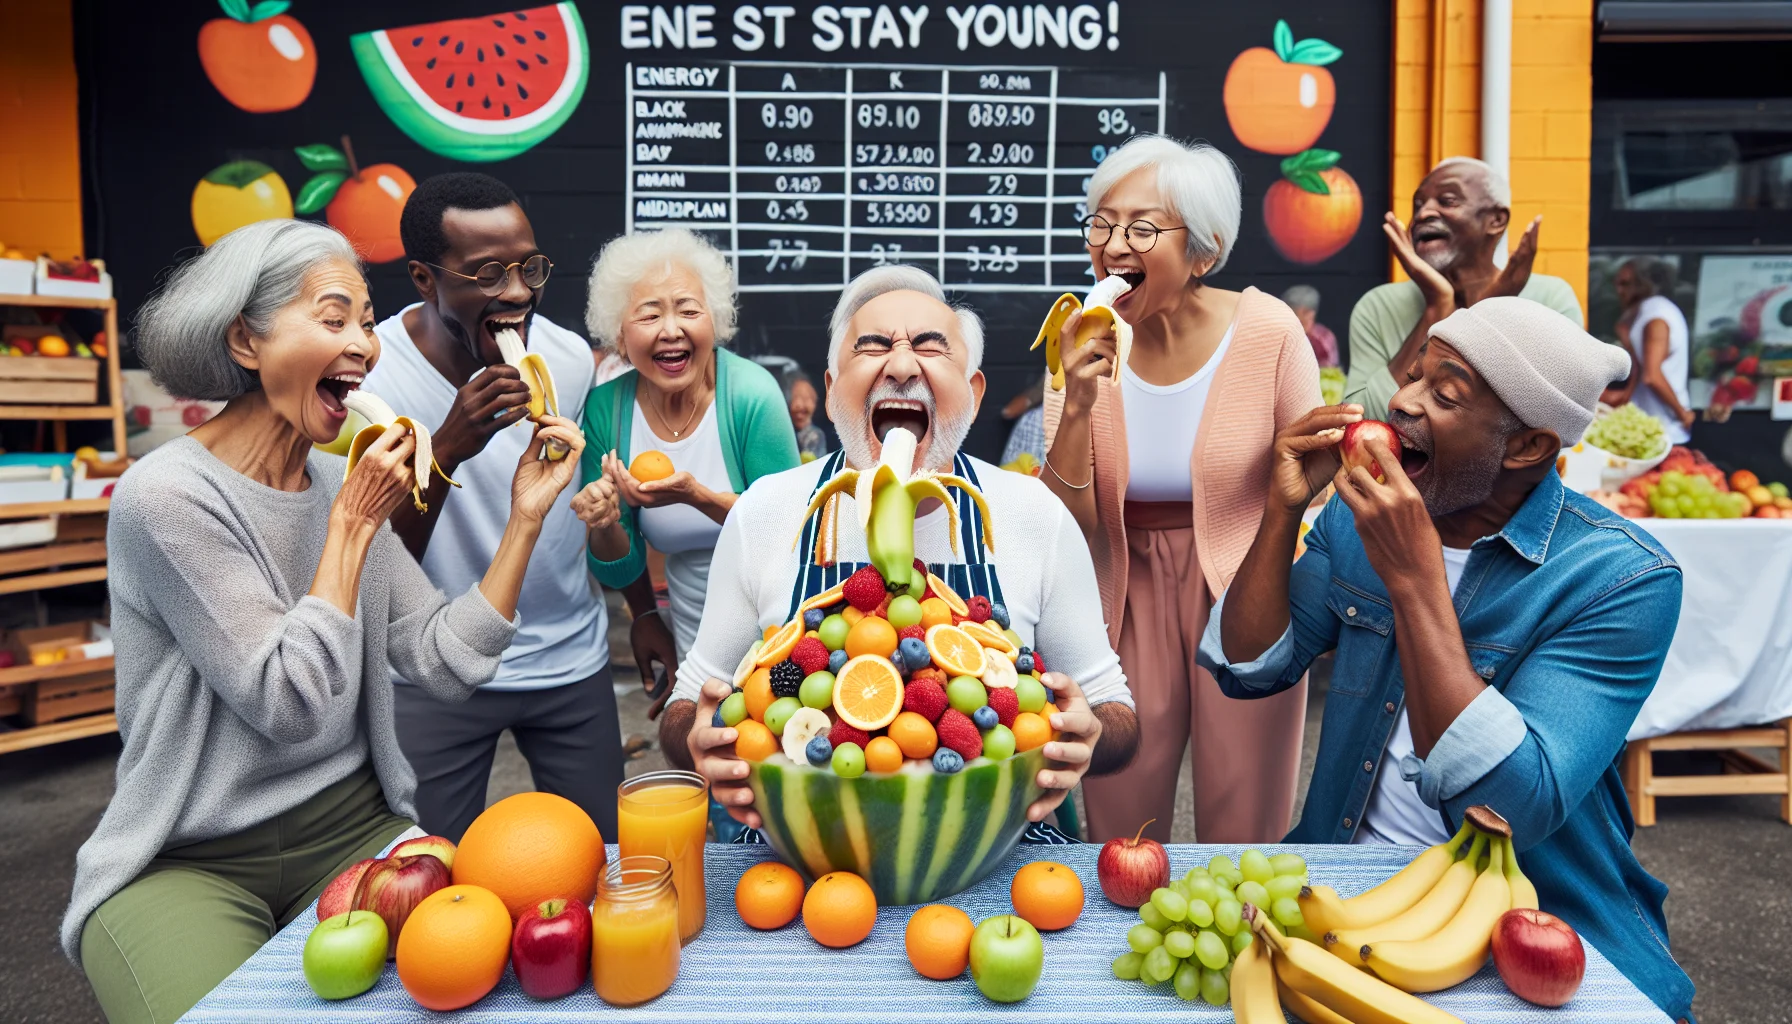 Create a humorous image of a vibrant farmer's market filled with energy-boosting fruits like bananas, oranges, and apples. Make it a lively place with elderly people of diverse descents including Black, Hispanic, and Middle Eastern, enjoying the experience. There's an elderly South Asian man consuming a large fruit salad enthusiastically as a group of Caucasian seniors looking at him amused. They're all participating in a light-hearted fruit diet challenge, with scores updated by a whiteboard. A fruit-themed flyer on the wall reads 'Eat Healthy, Stay Young!'